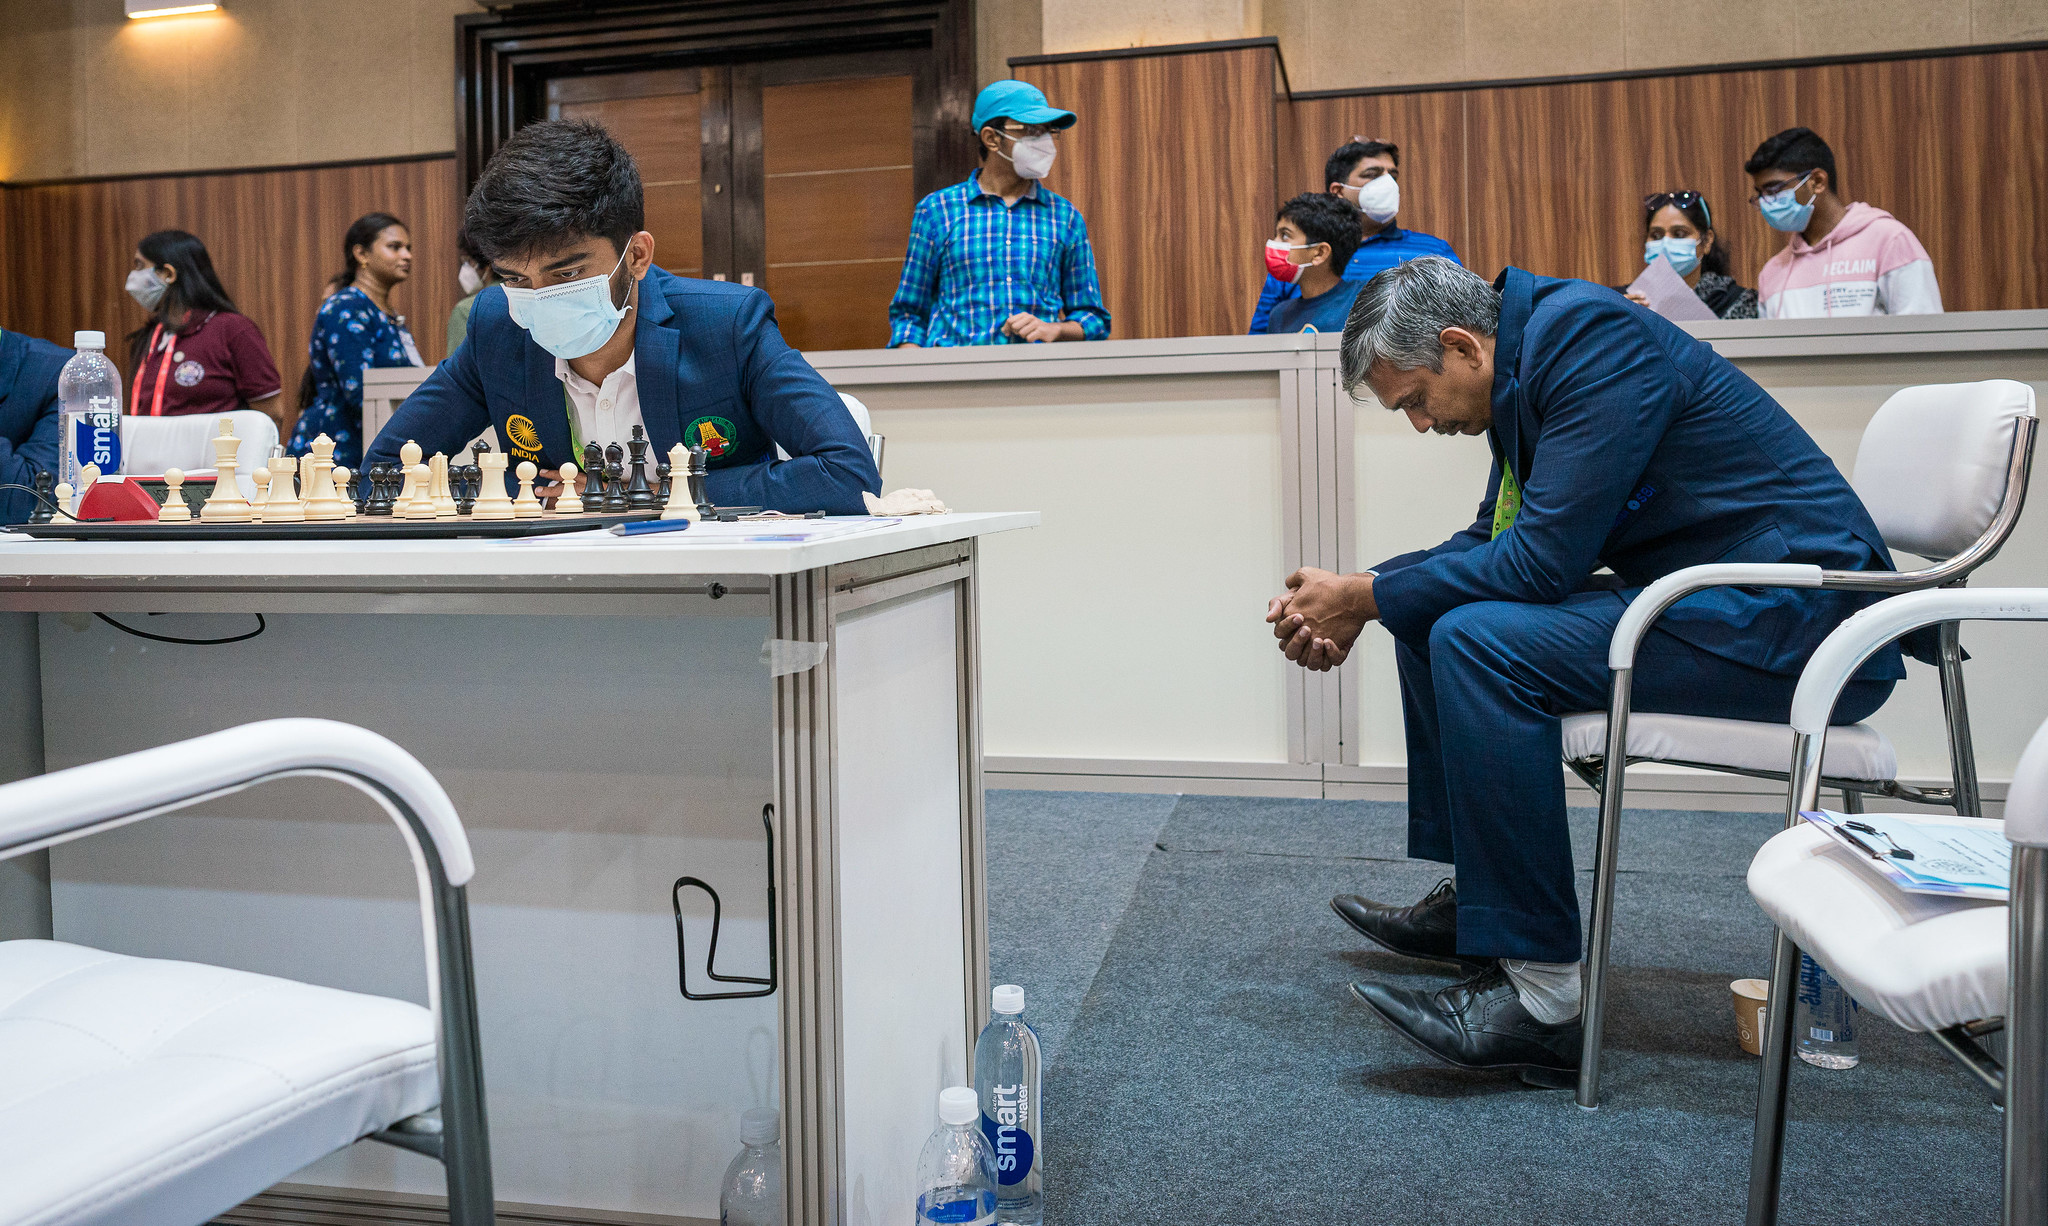 He is not the only one crying”, Chess Olympiad 2022 is over